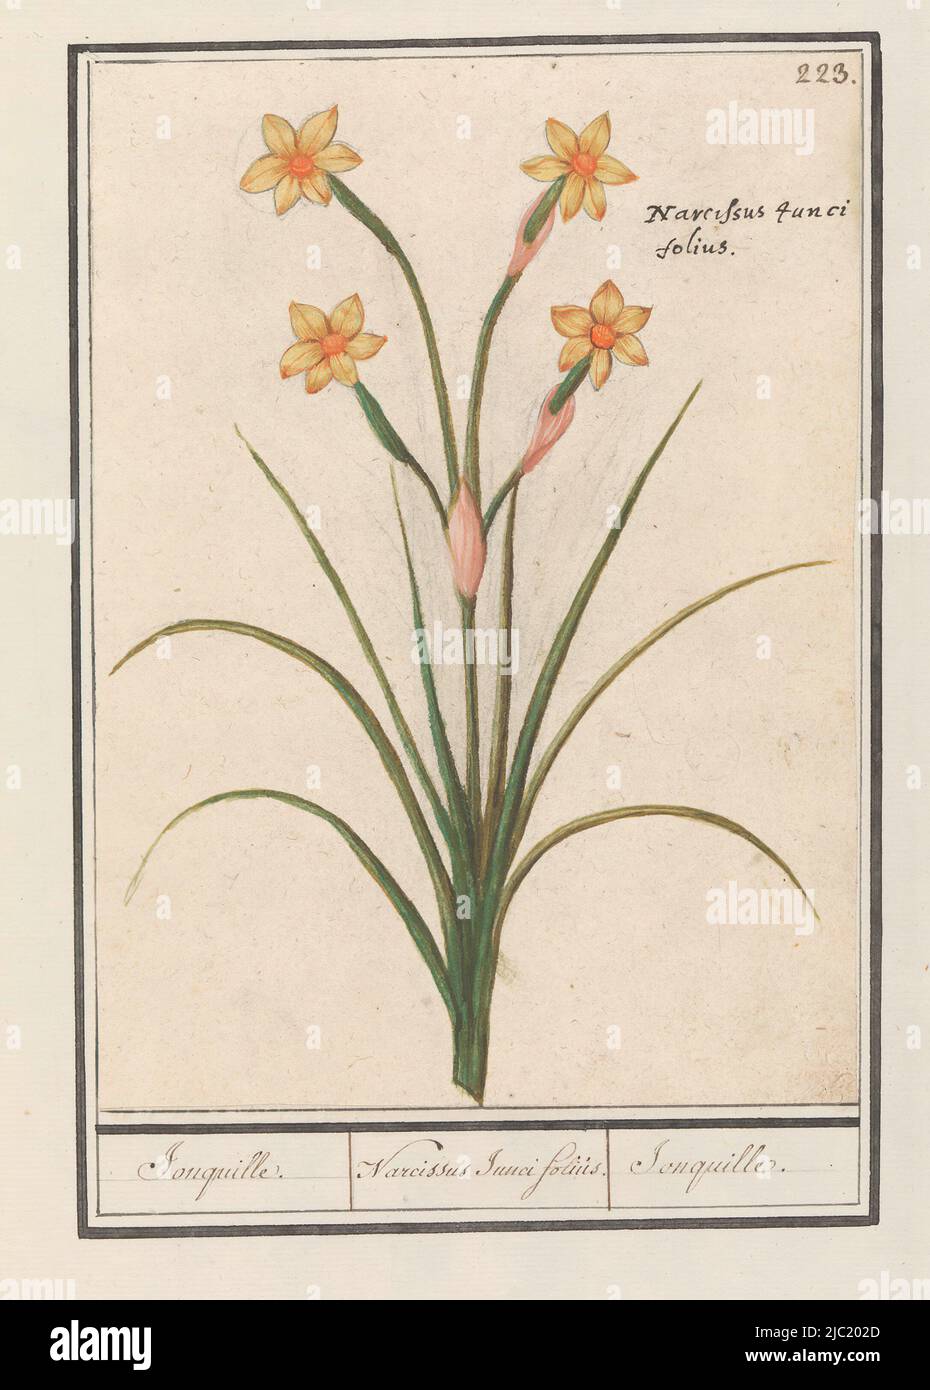 Daffodil. Numbered upper right: 223. Top right the Latin name. Part of the third album with drawings of flowers and plants. Tenth of twelve albums with drawings of animals, birds and plants known around 1600, commissioned by Emperor Rudolf II. With notes in Dutch, Latin and French, Narcissus (Narcissus) Jonquille. / Narcissus Junci folius. / Jonquille., draughtsman: Anselmus Boëtius de Boodt, draughtsman: Elias Verhulst, draughtsman: Praag, draughtsman: Delft, 1596 - 1610, paper, brush, pen, h 231 mm × w 167 mm Stock Photo